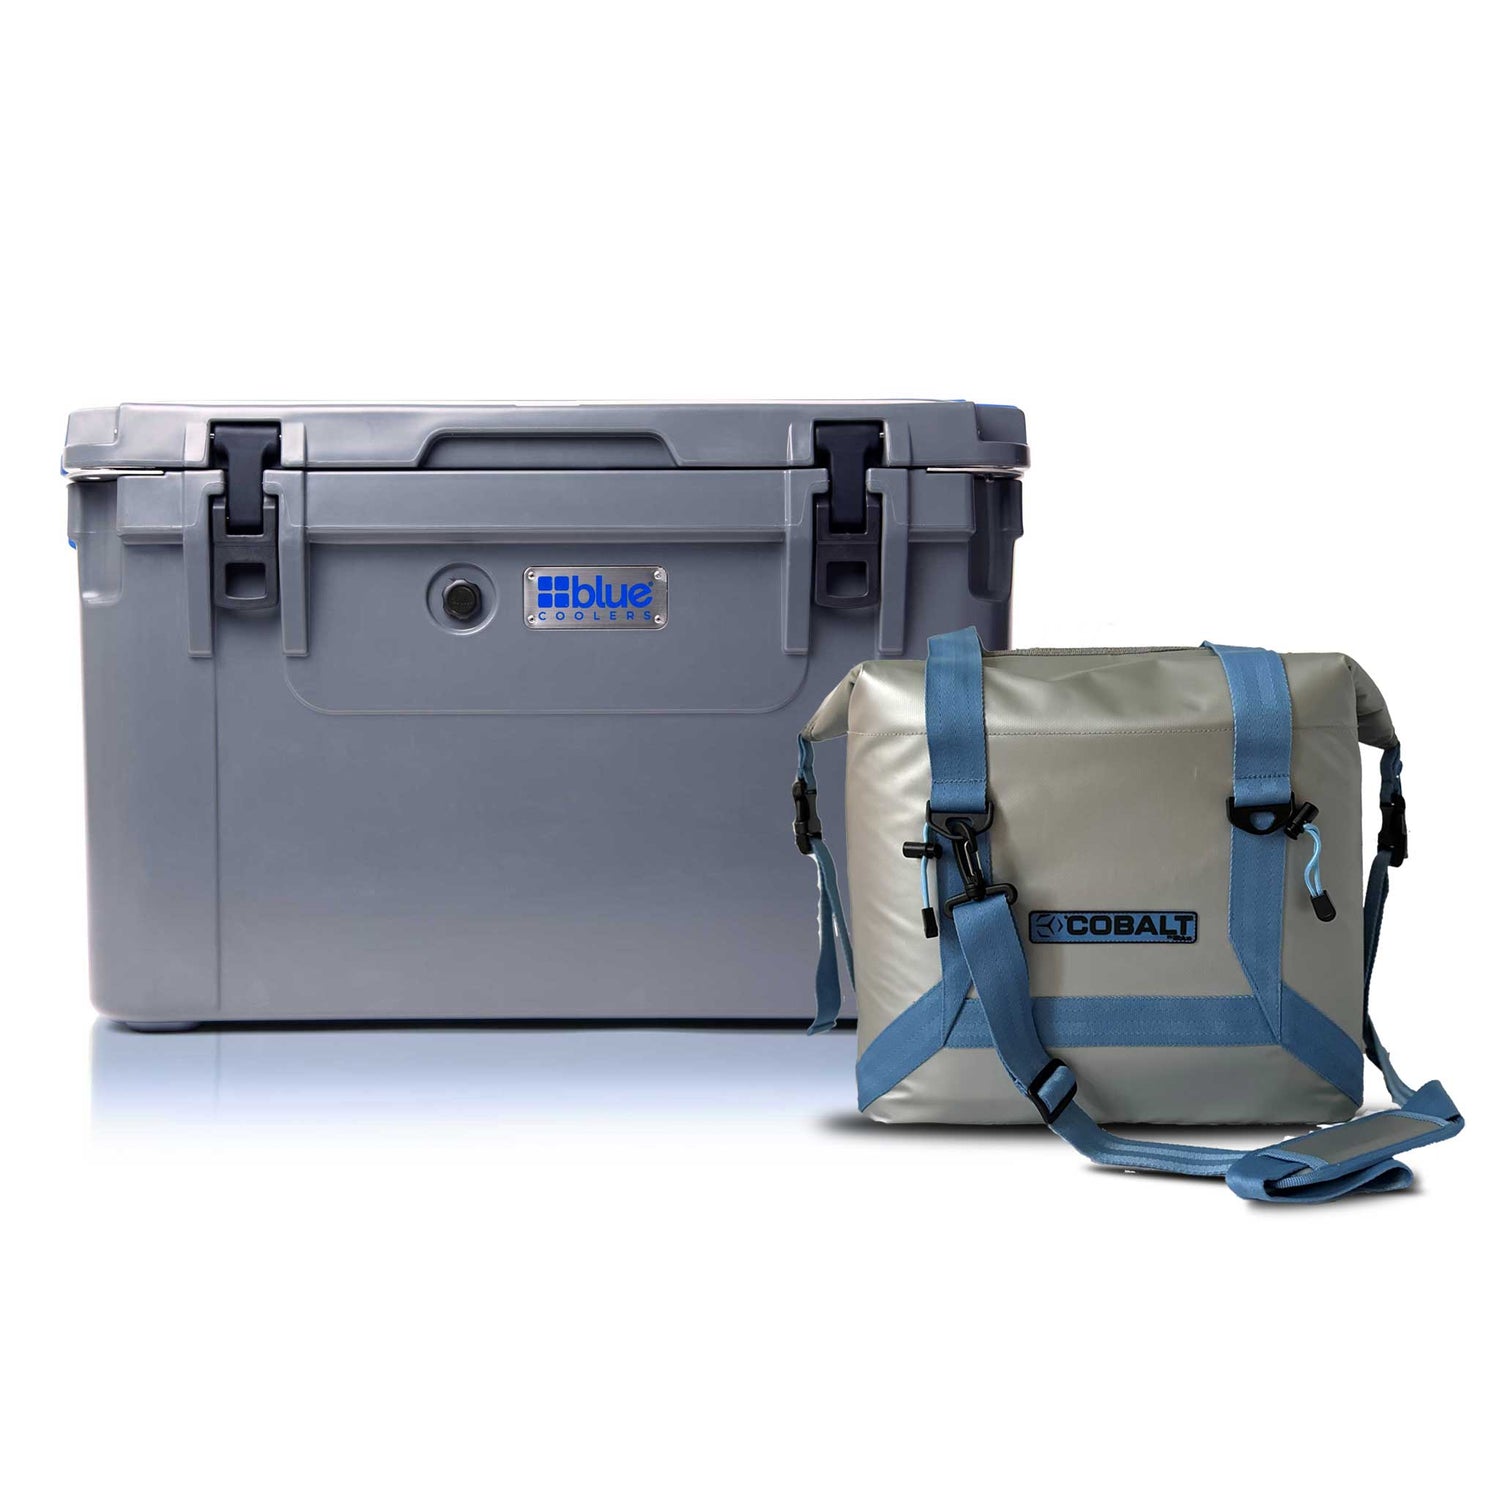 Double the Chill Side Tote Bundle - Roto Molded Cooler + Soft Sided Cooler